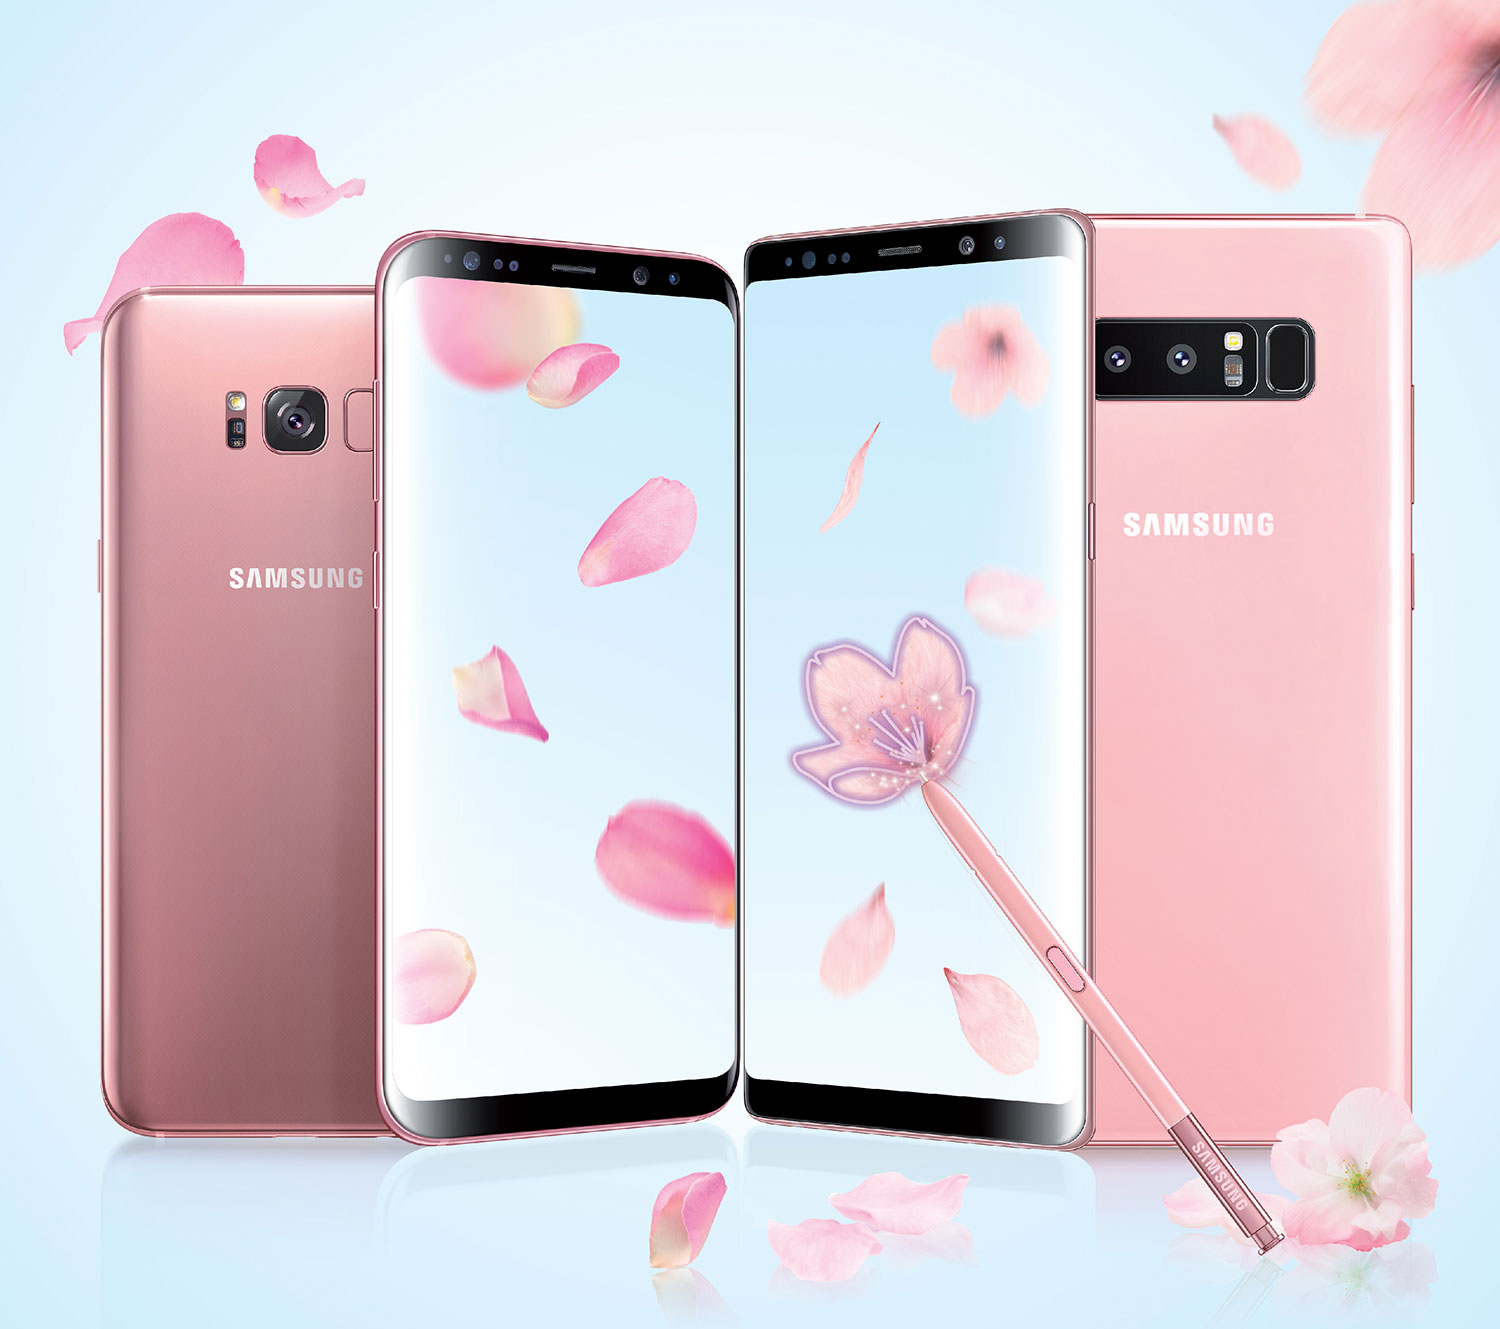 Samsung Malaysia Adds Pink Galaxy S8, S8+ and Note8